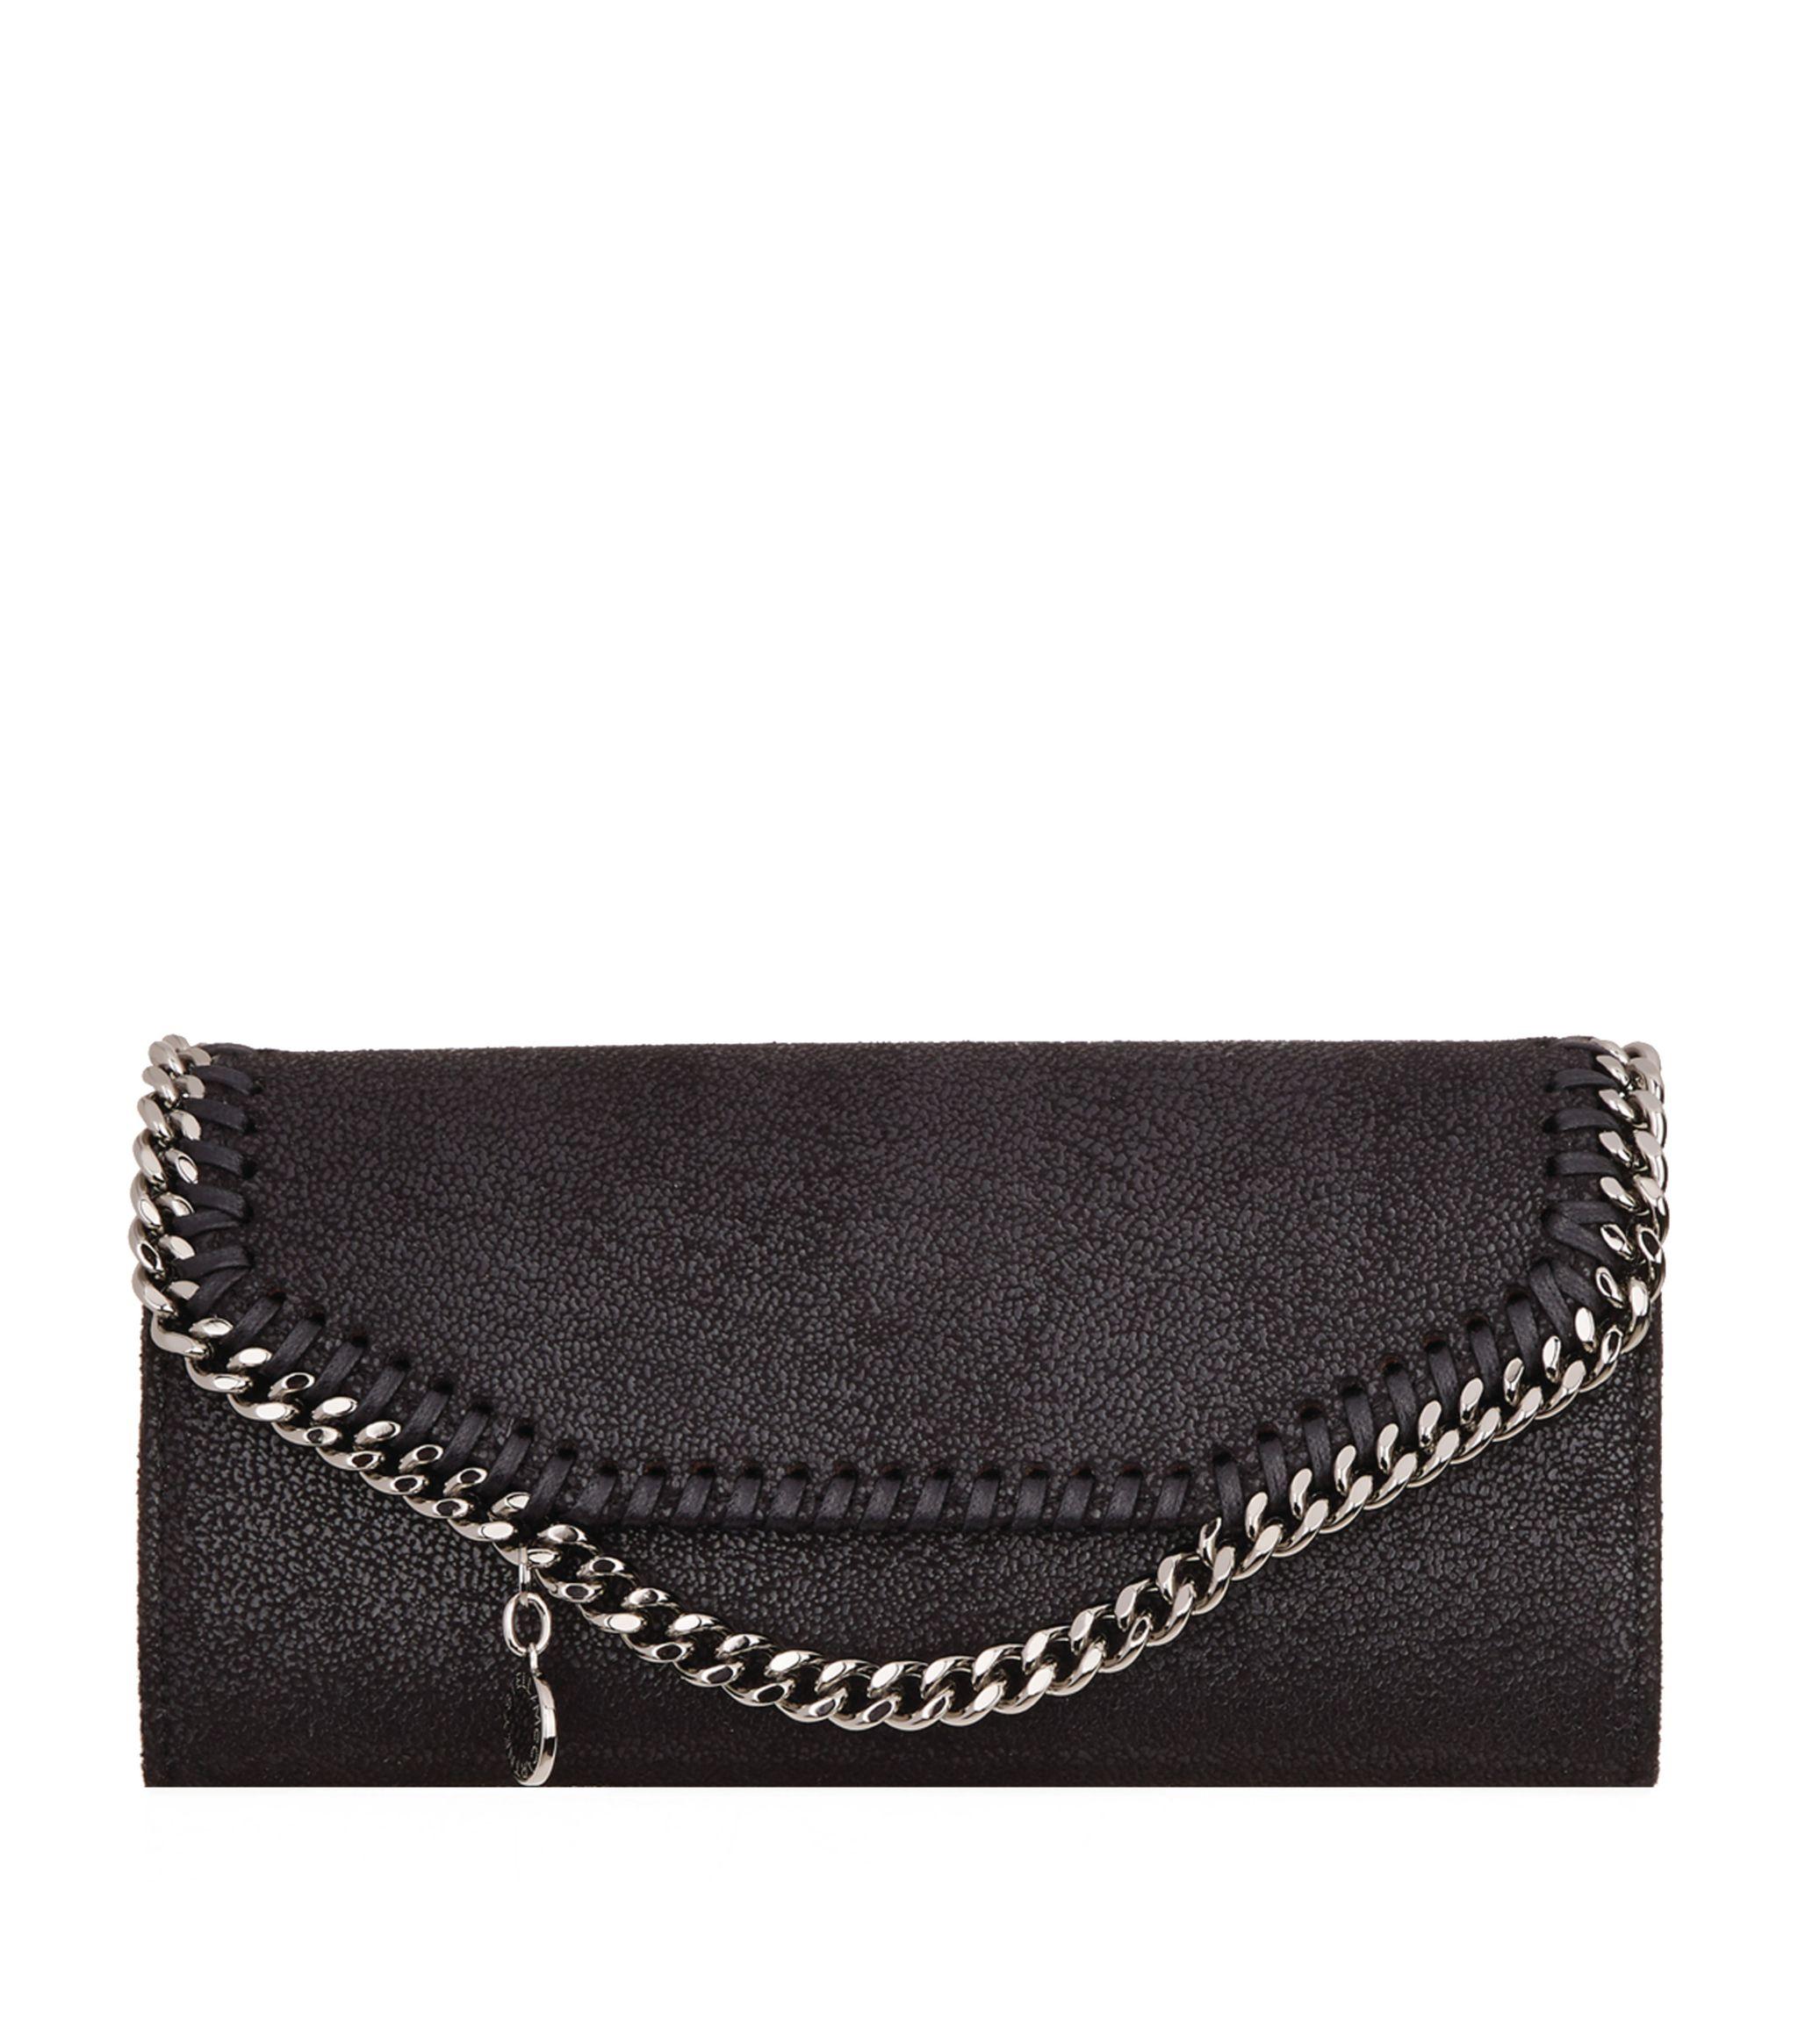 Stella McCartney Leather Falabella Continental Shaggy Deer Wallet in ...